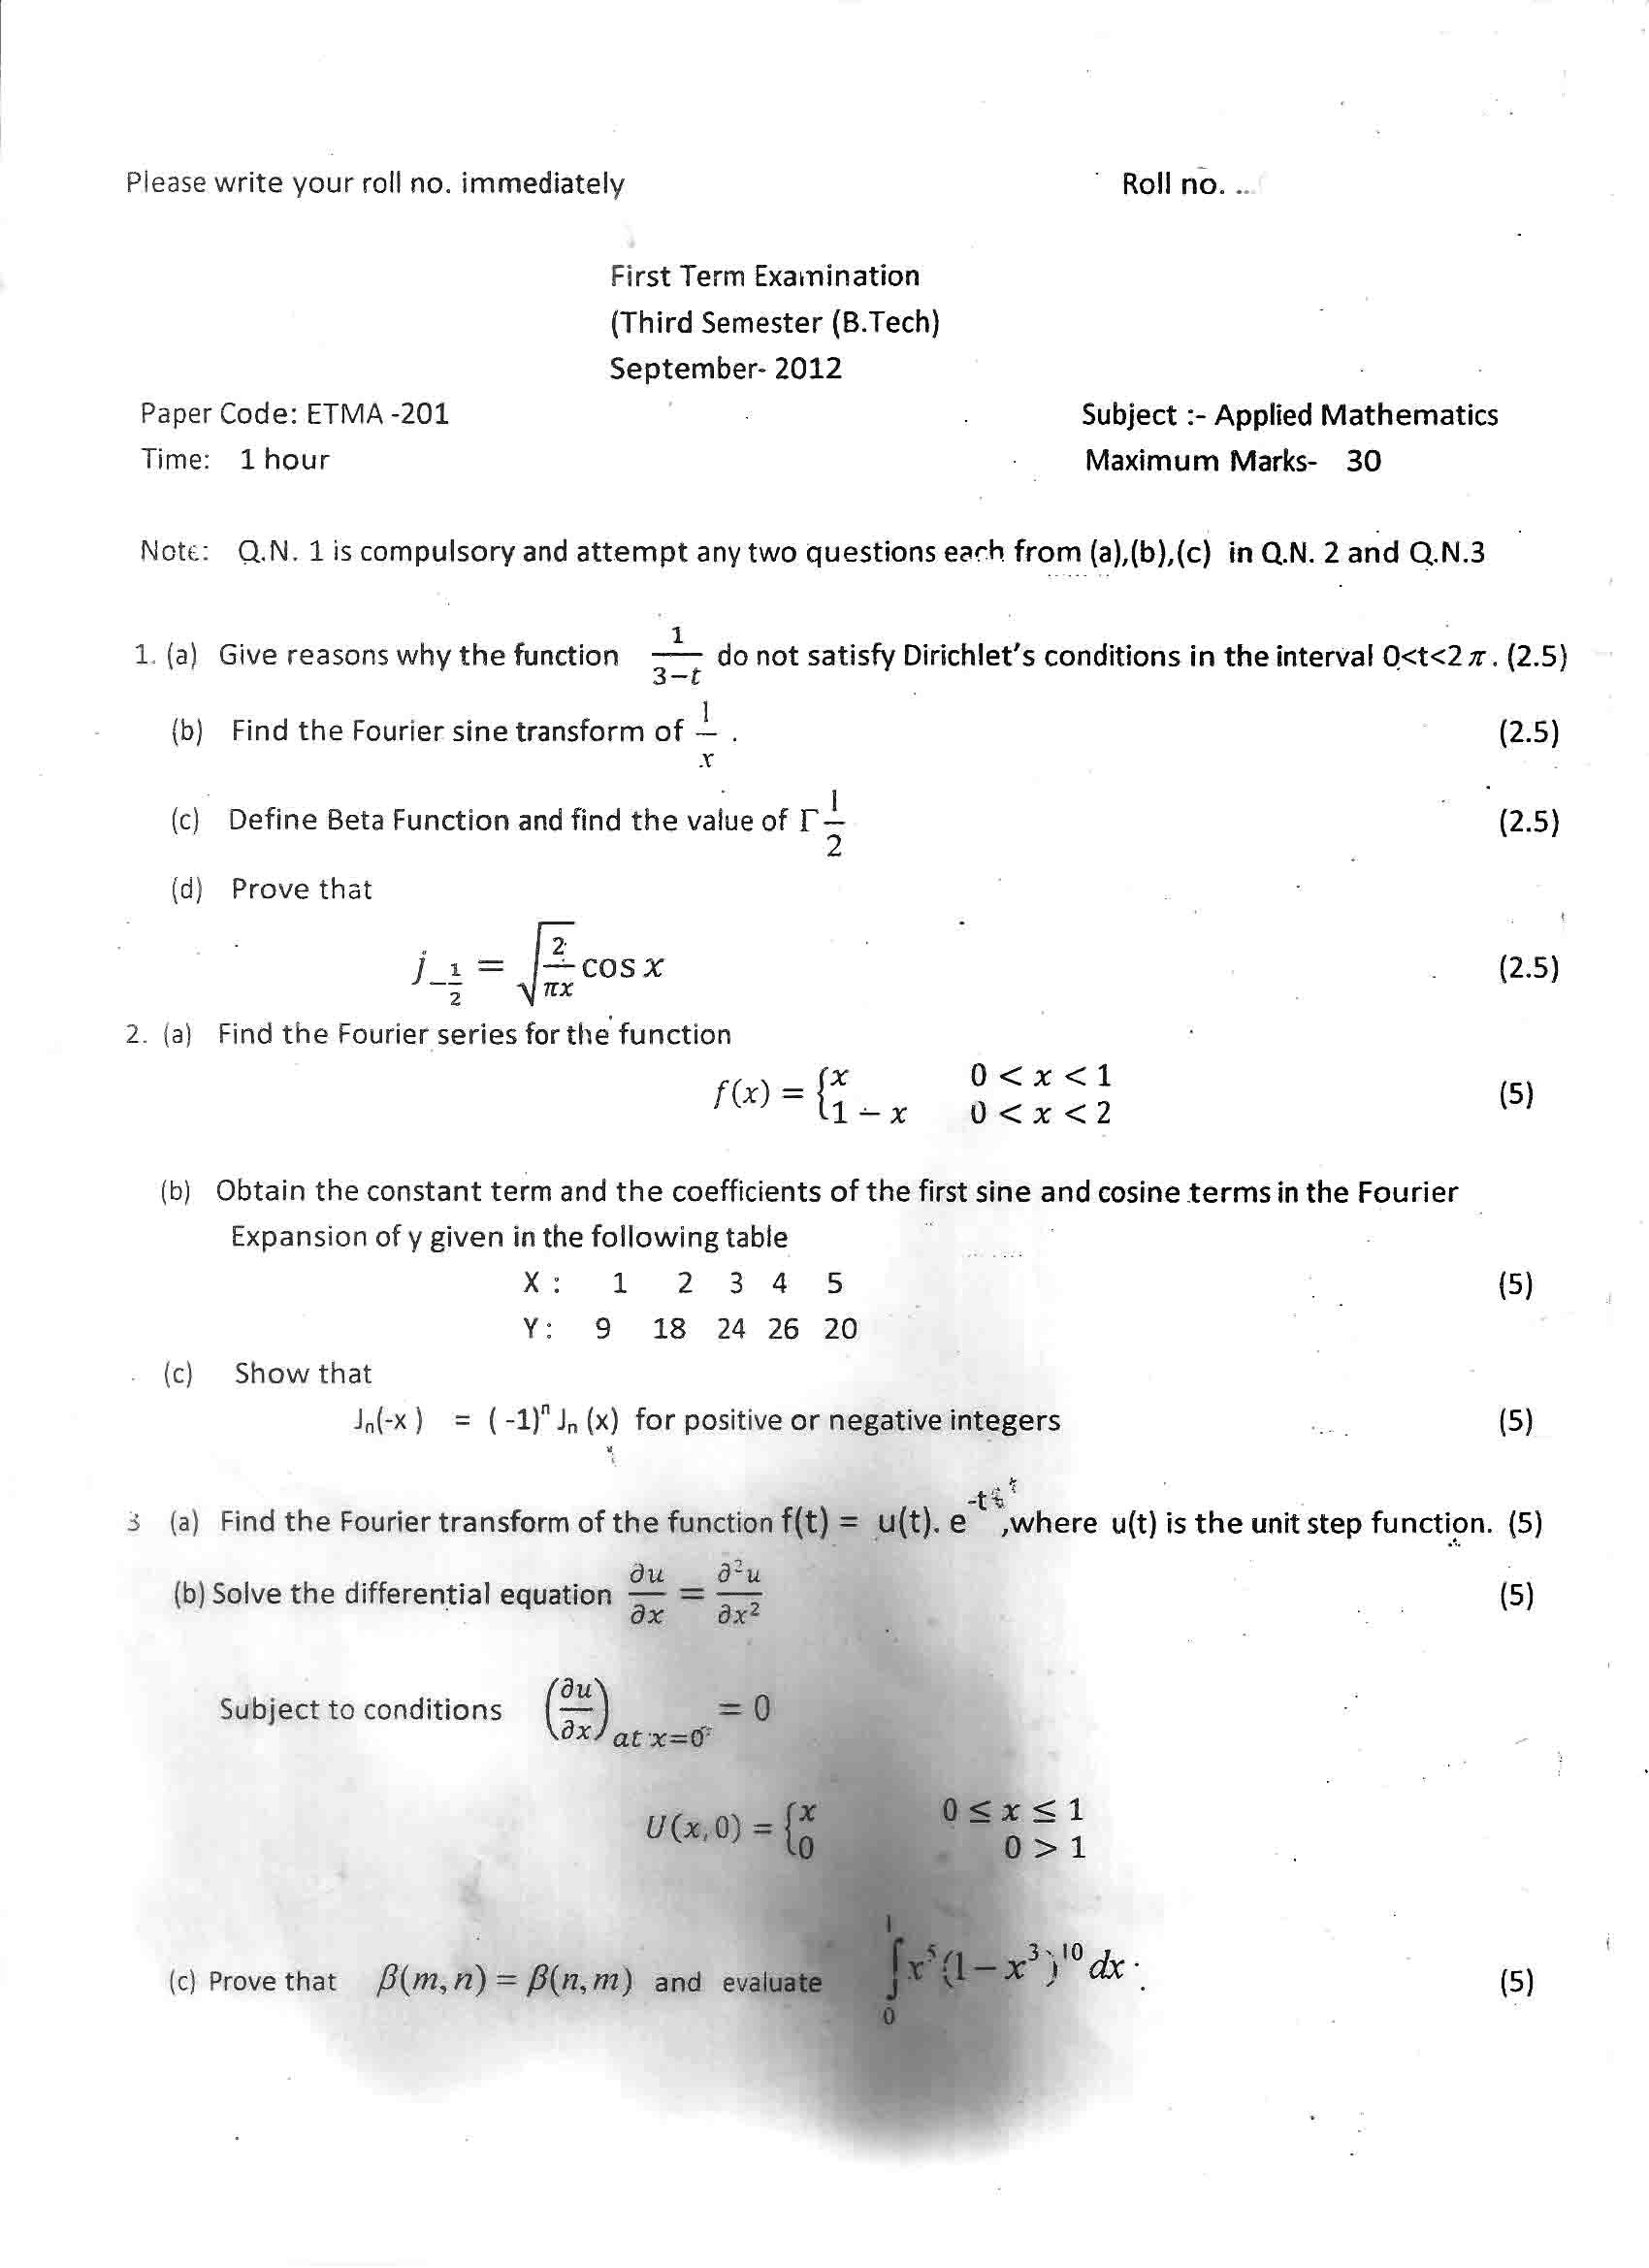 GGSIPU Question Papers Third Semester  First Term 2012  ETMA-201